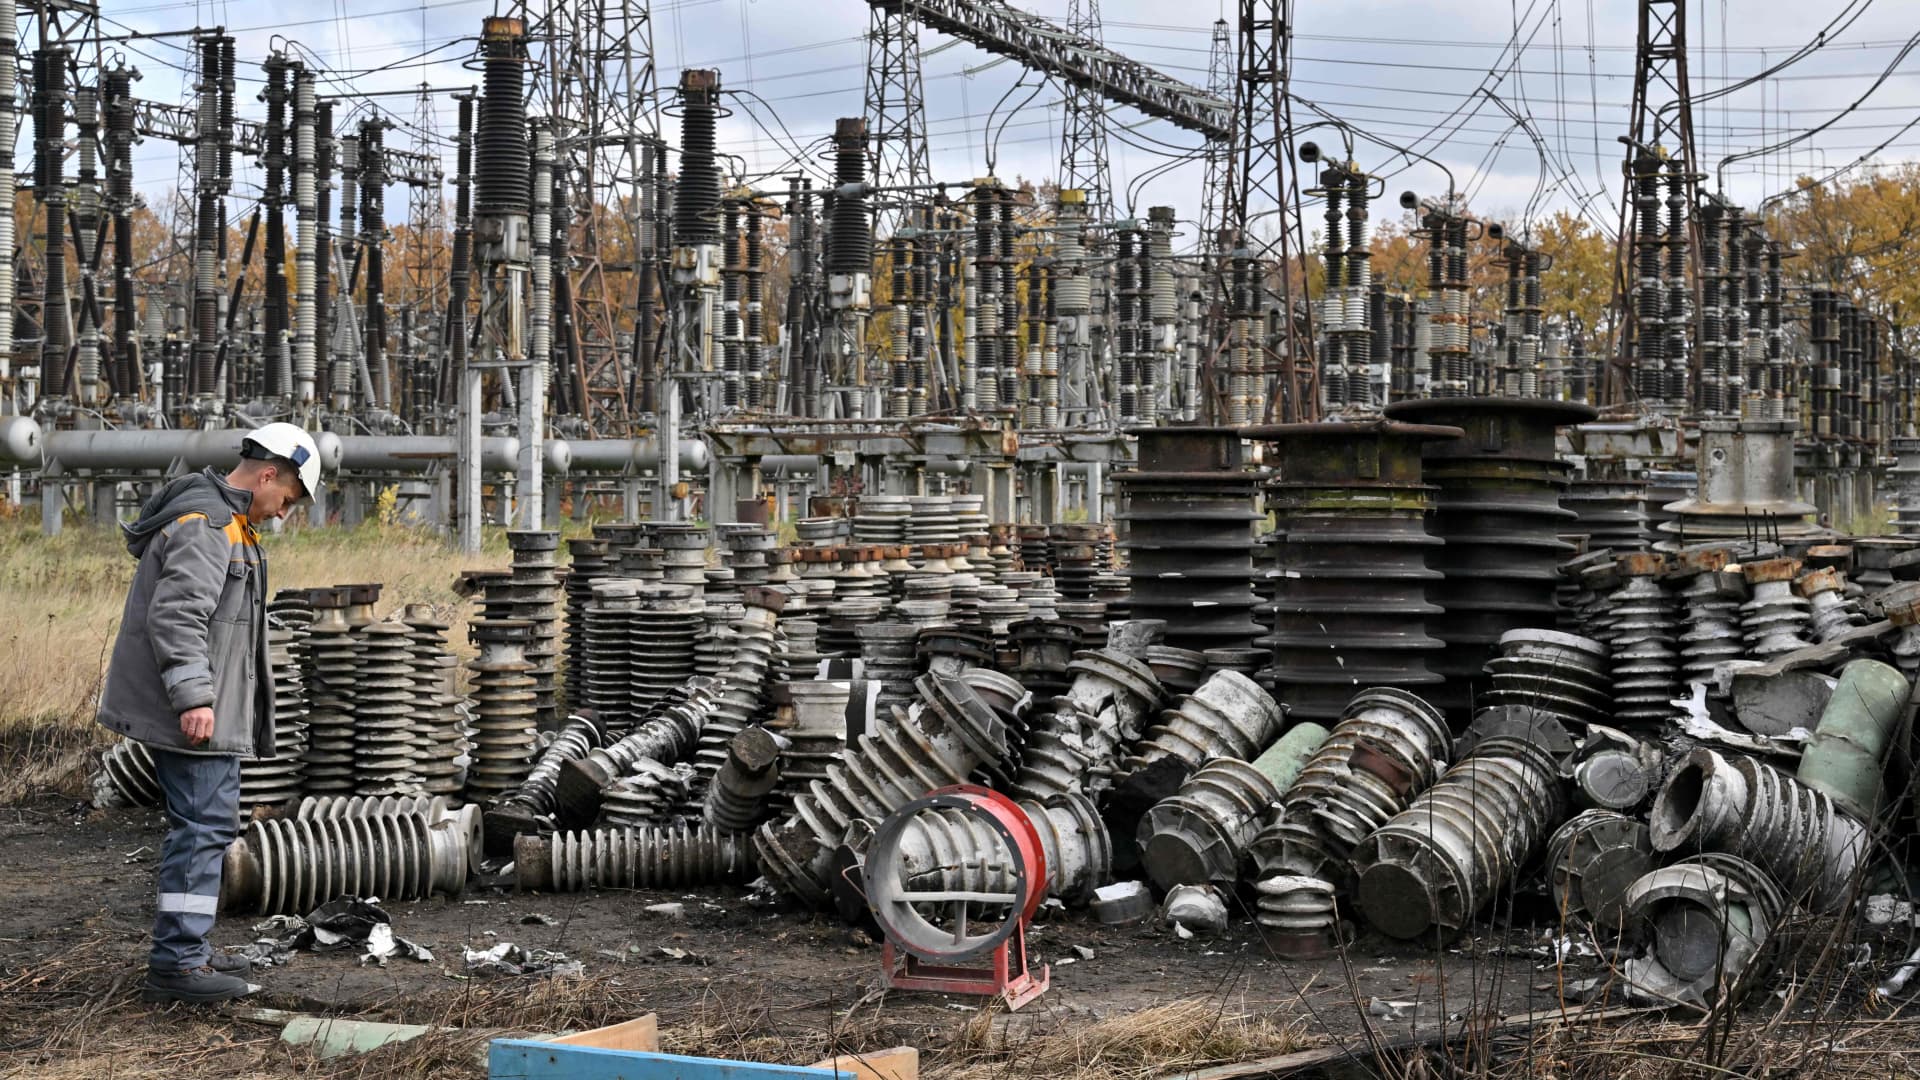 A worker examines damage as he repairs power line equipment destroyed after a missile strike on a power plant, in an undisclosed location of Ukraine, on Oct. 27, 2022.